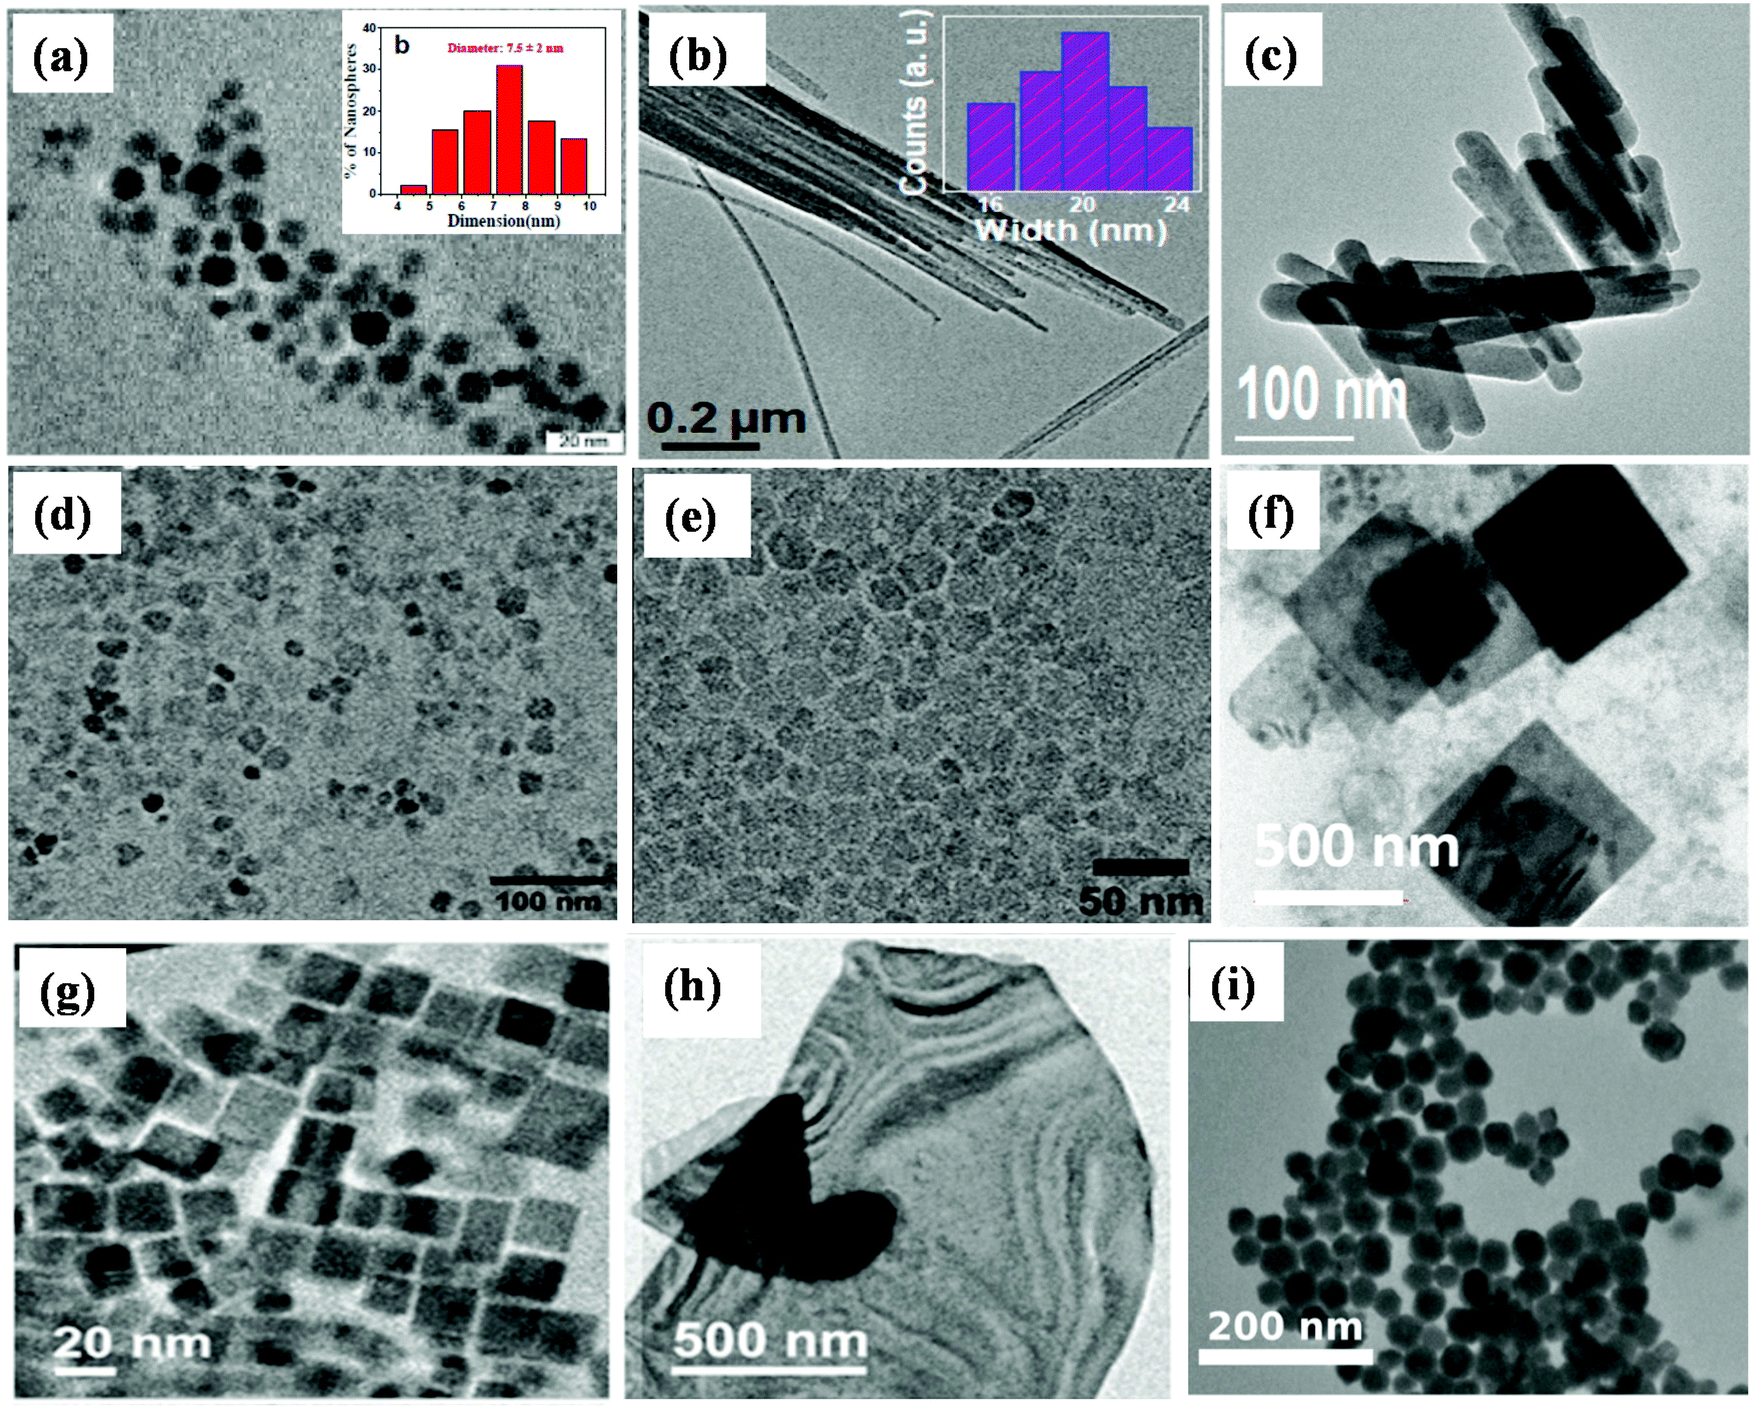 2d Layered All Inorganic Halide Perovskites Recent Trends In Their Structure Synthesis And Properties Nanoscale Rsc Publishing Doi 10 1039 D0nrg